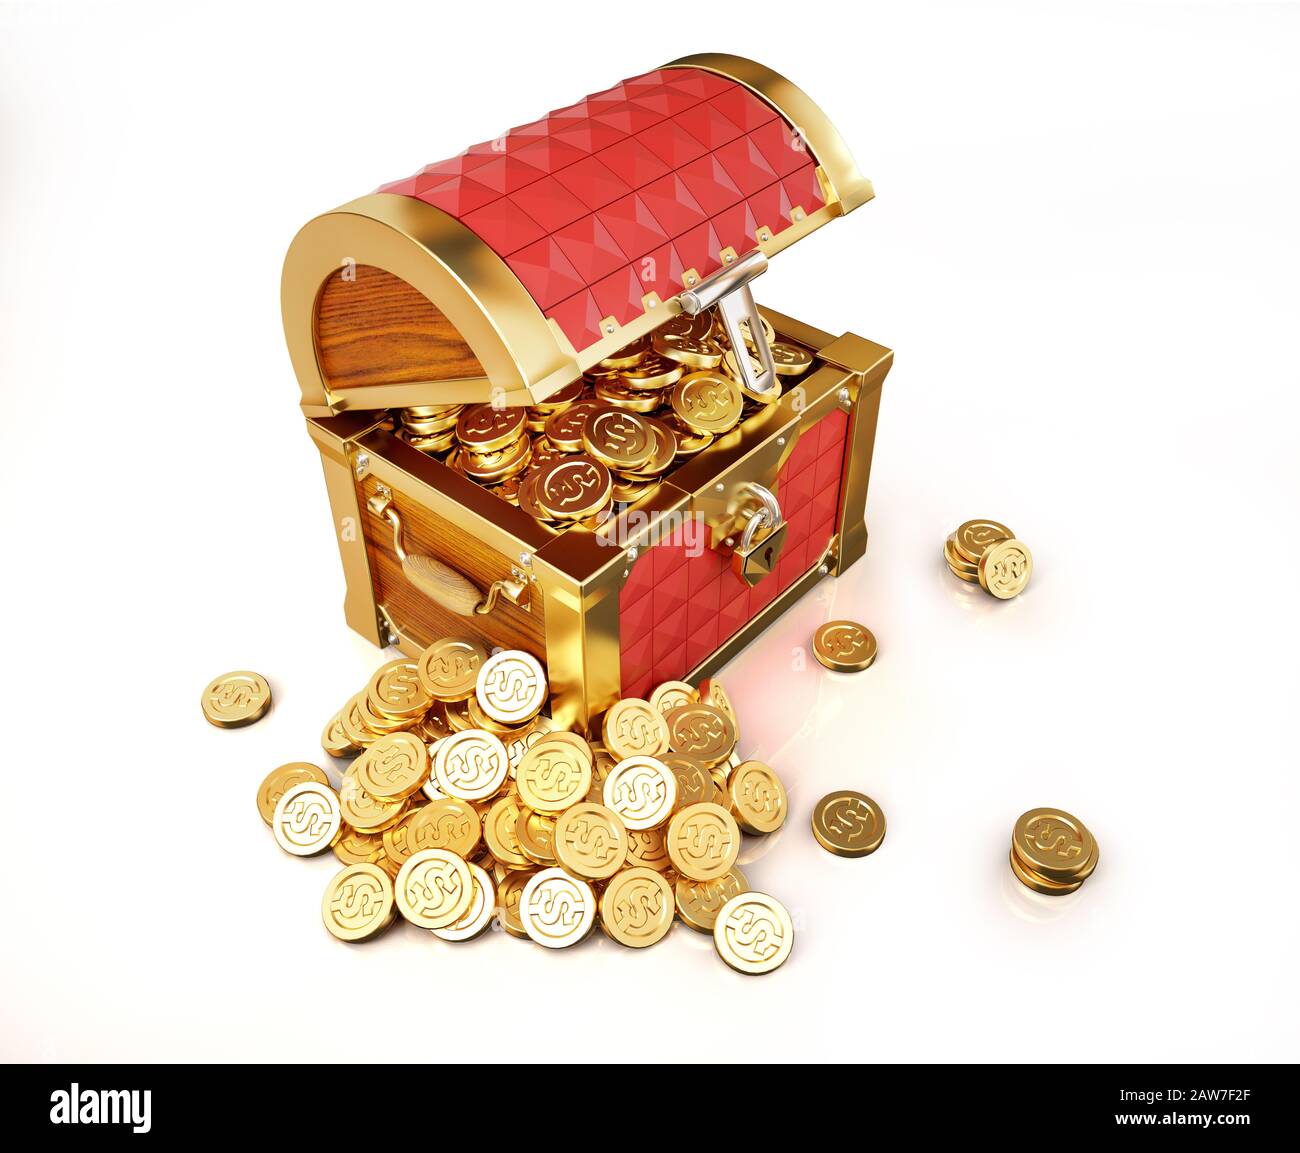 Gold Coins Chest Stock Photos and Pictures - 21,073 Images